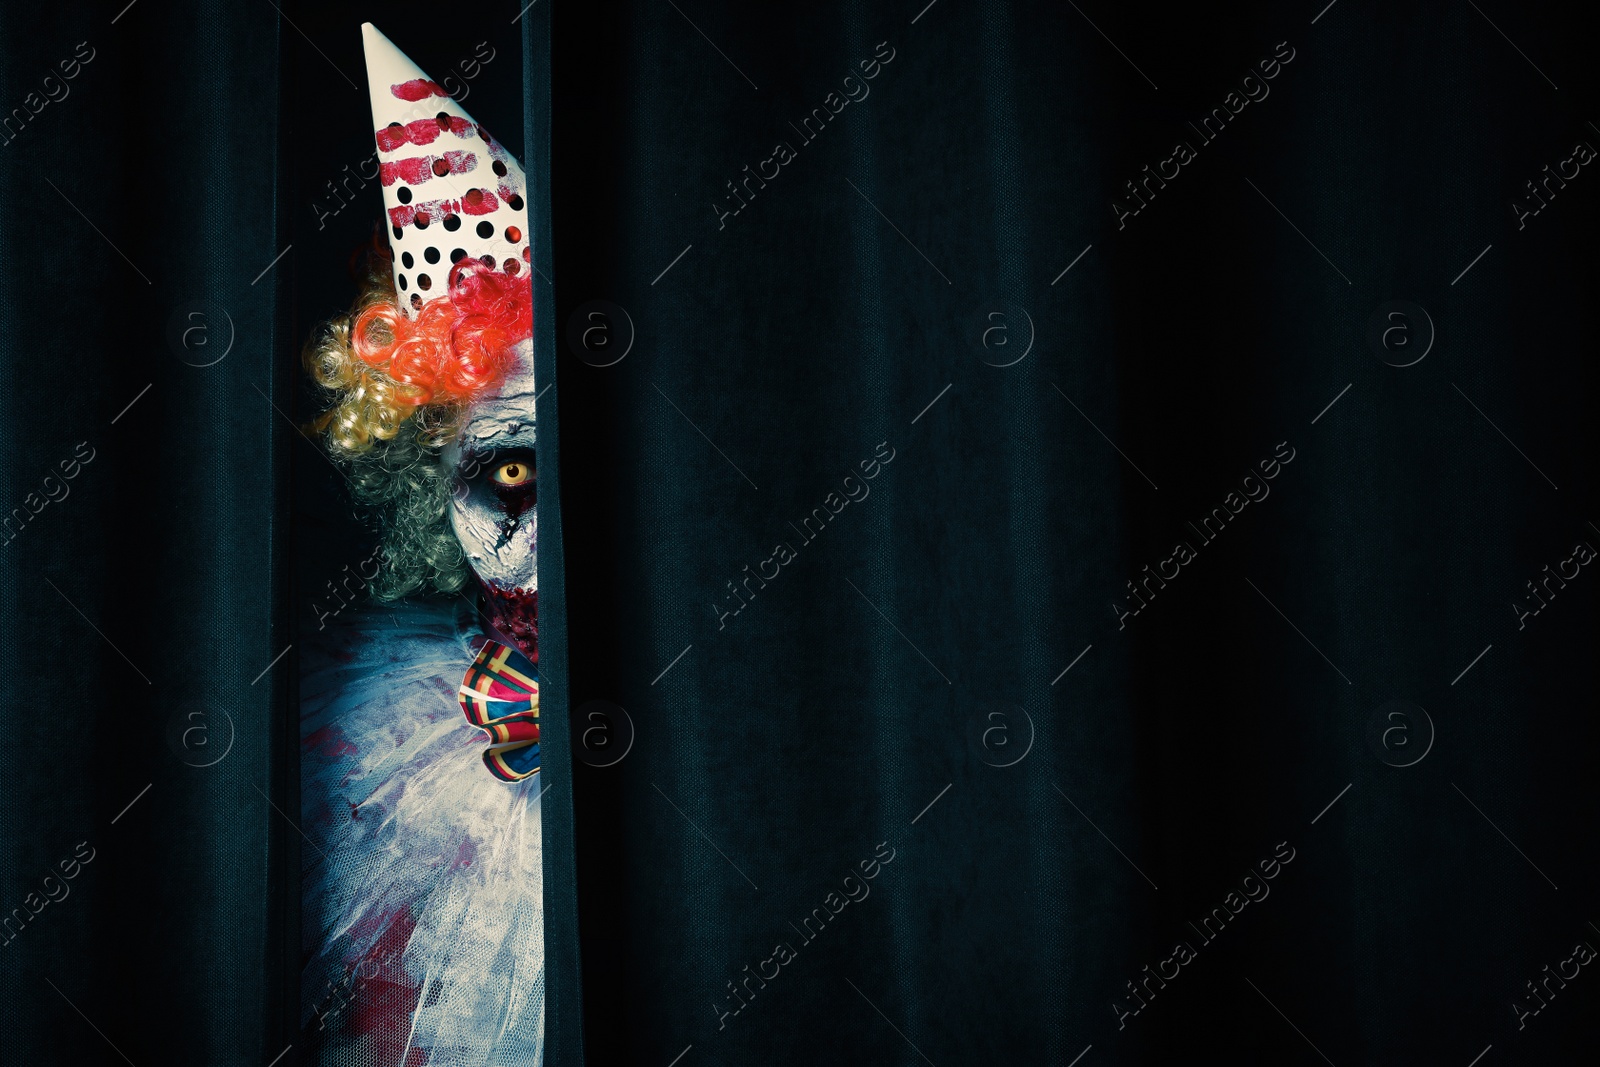 Photo of Terrifying clown hiding behind black curtains, space for text. Halloween party costume